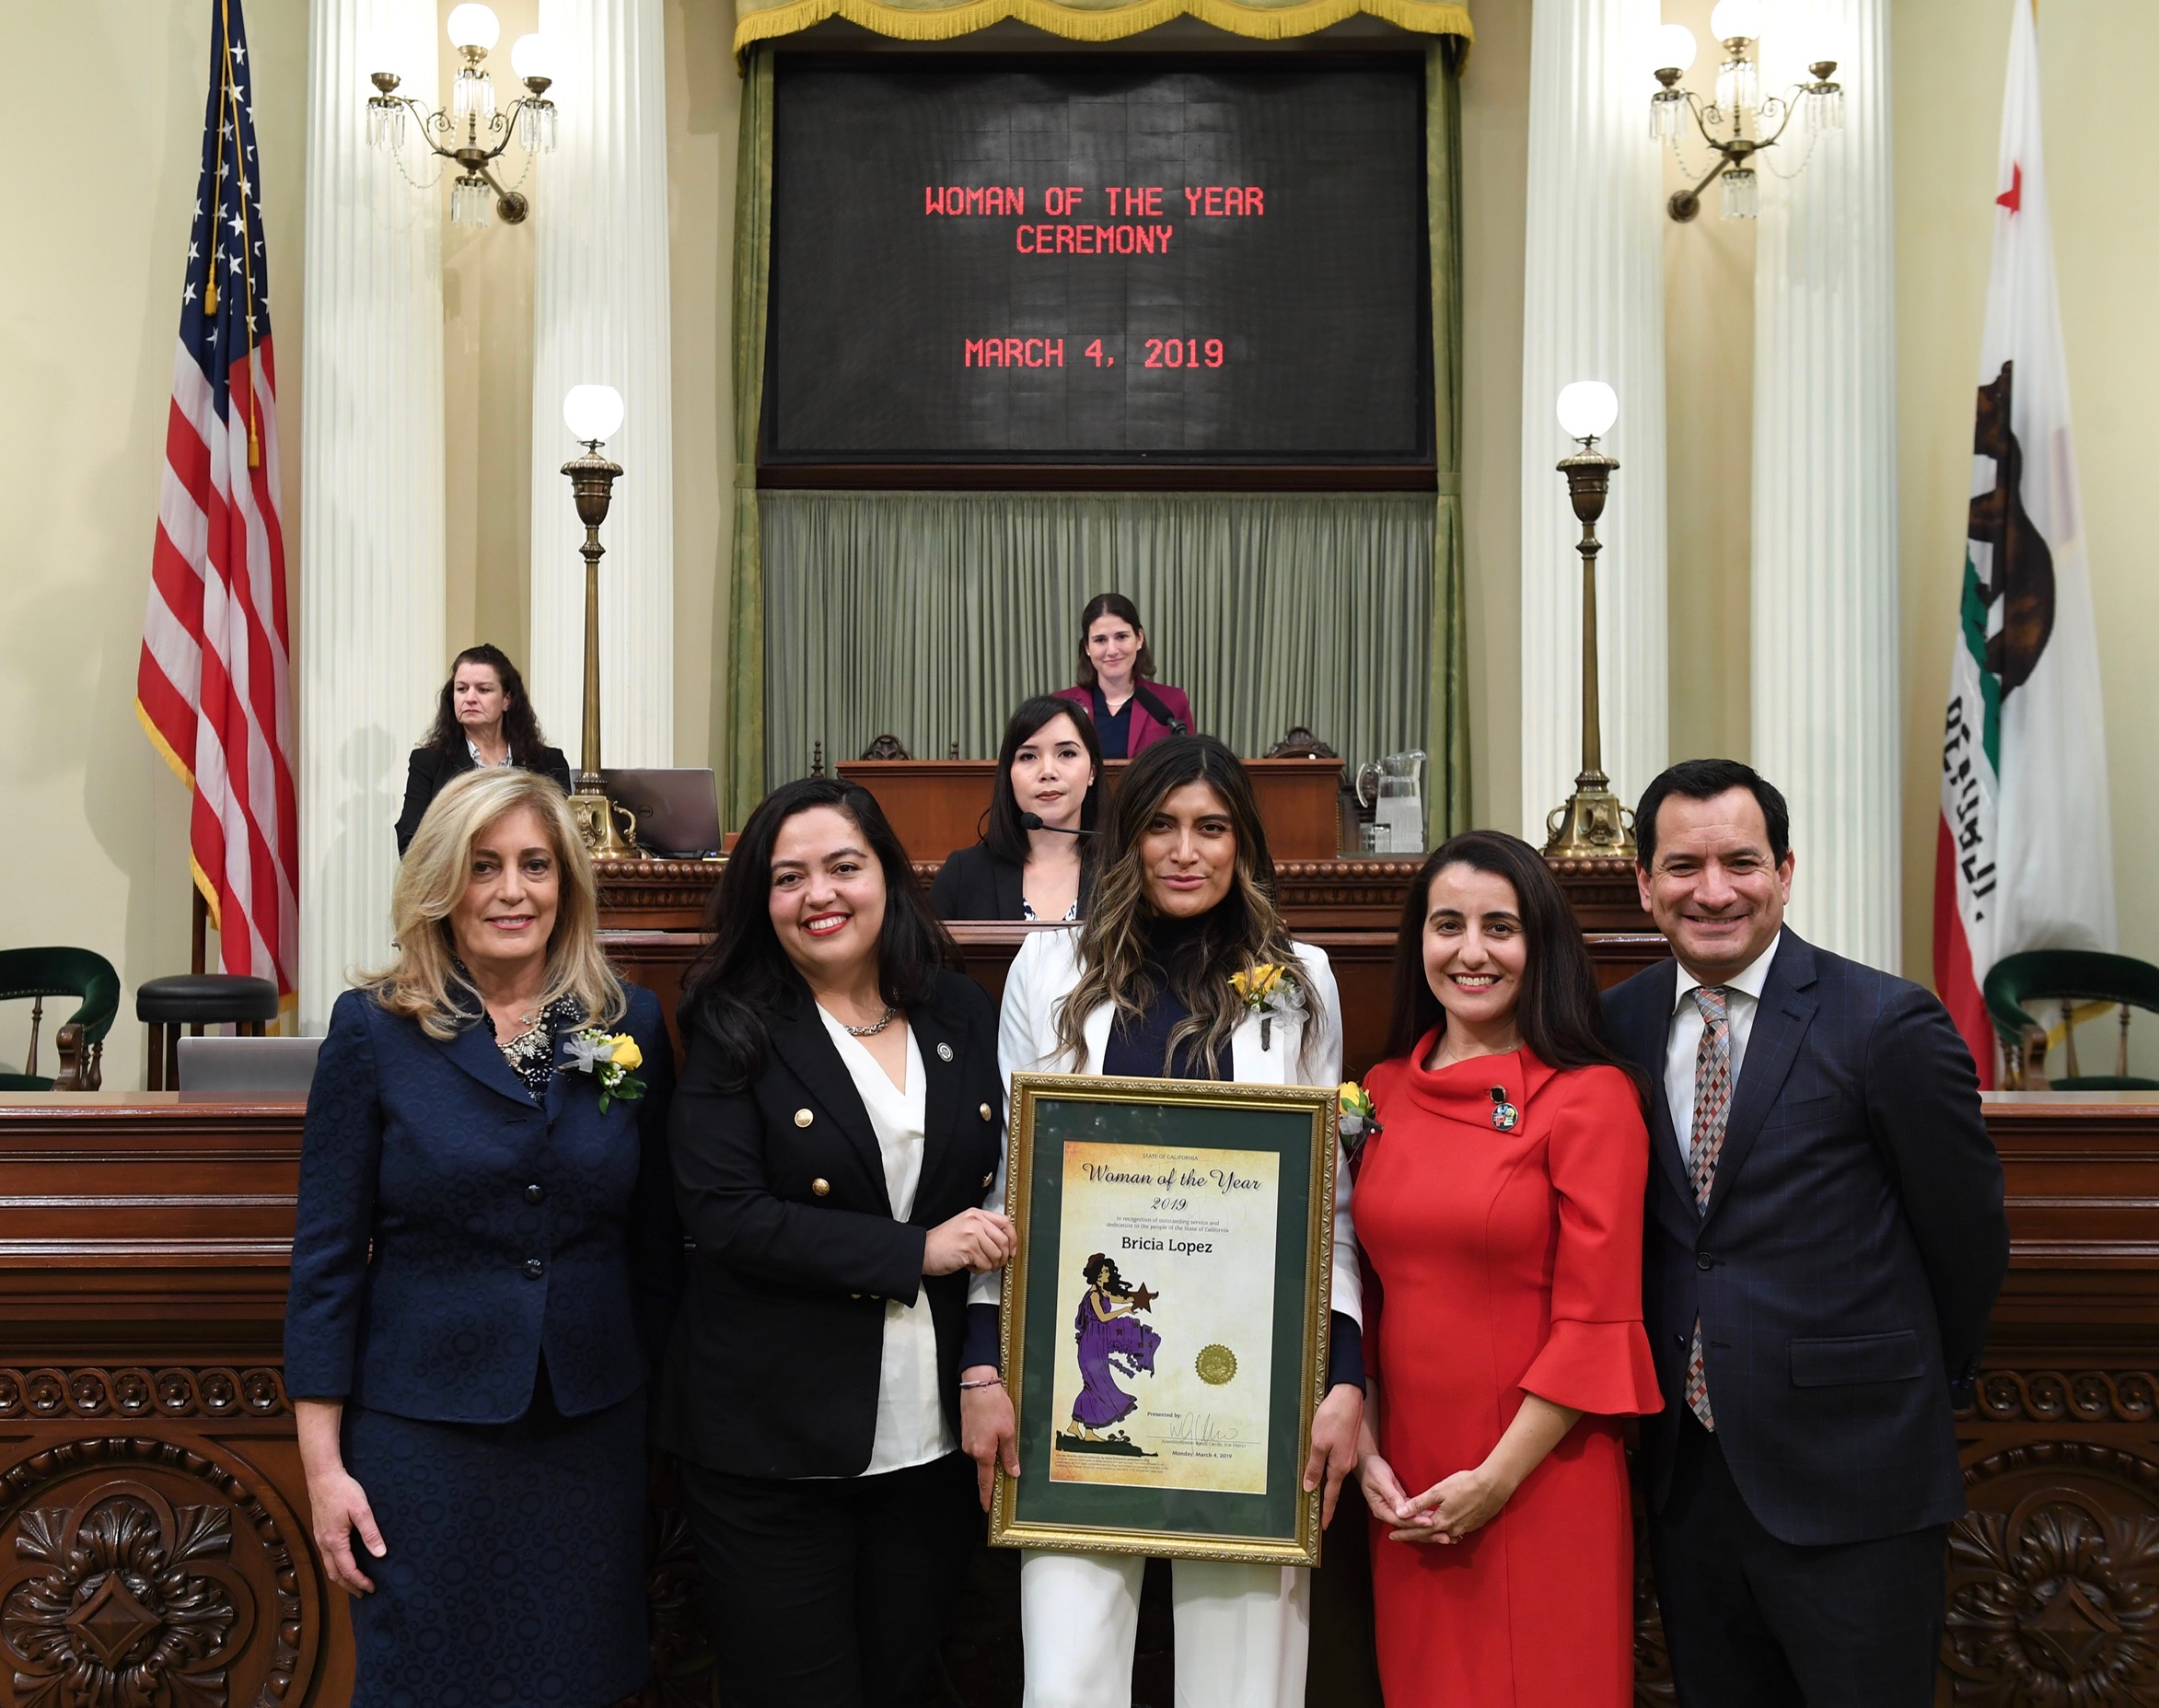 Bricia Lopez was named the 2019 Woman of the Year of the 51st Assembly District